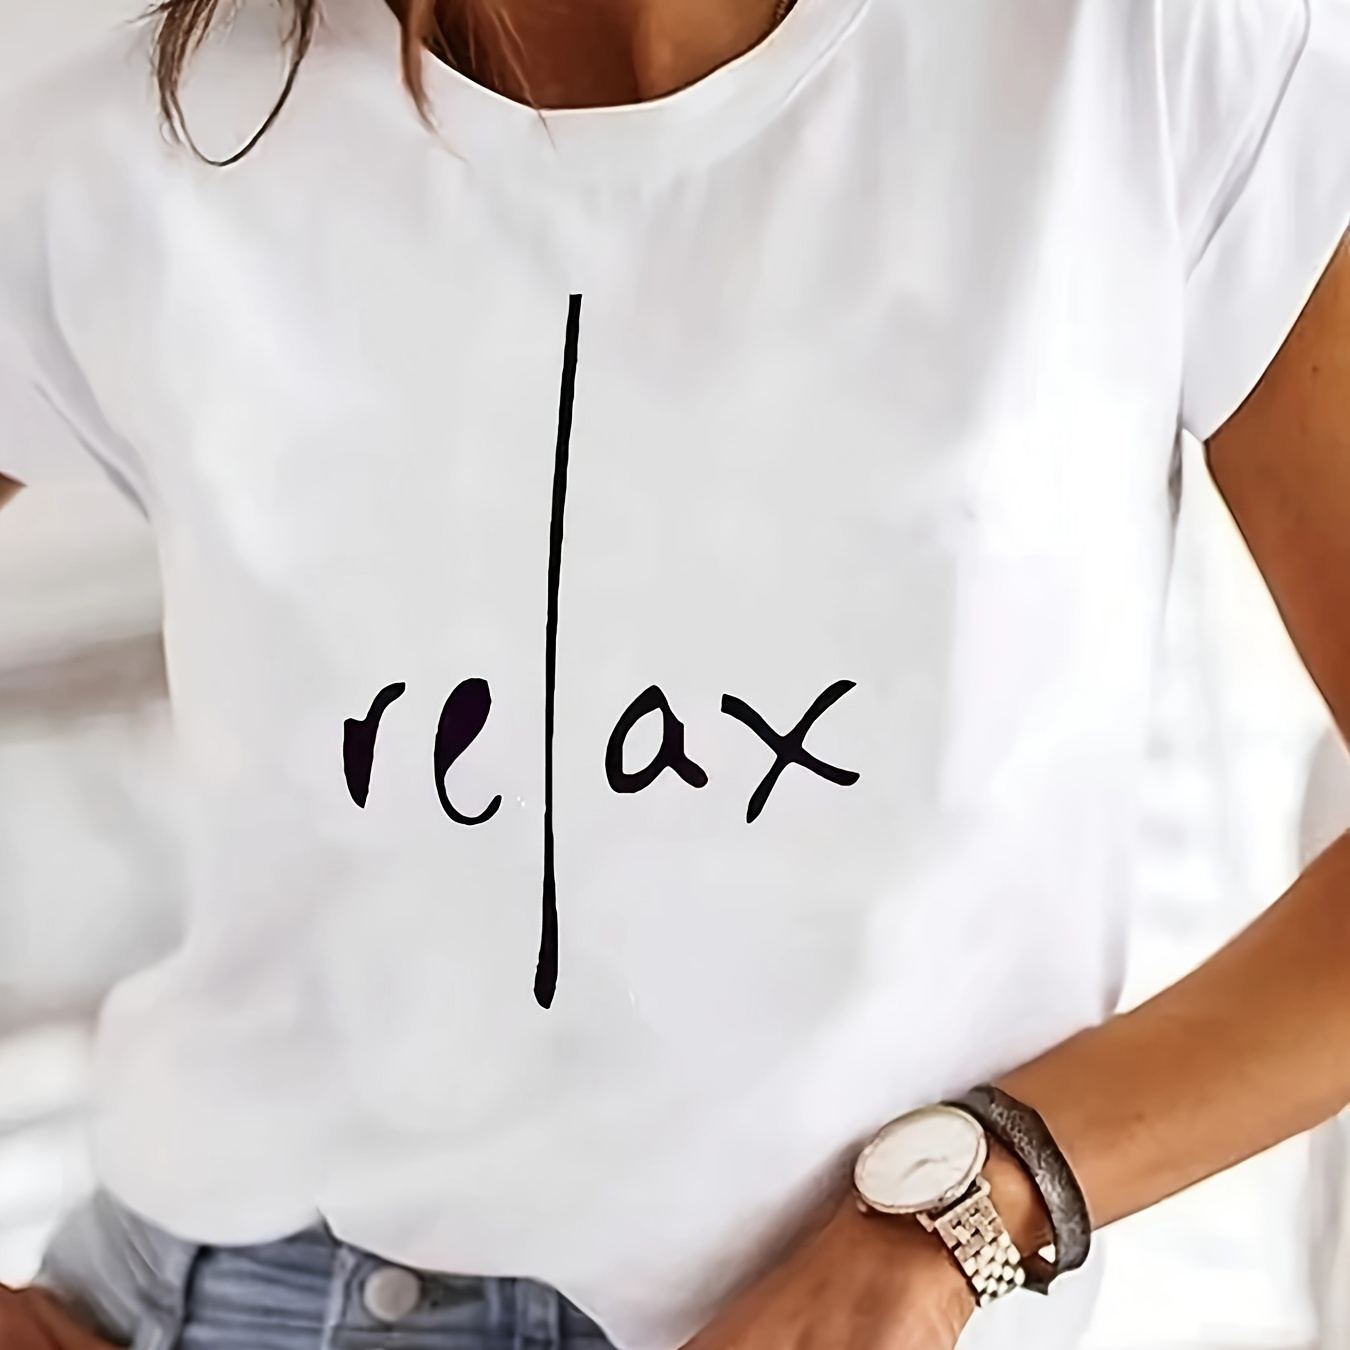 

Letter Print T-shirt, Short Sleeve Crew Neck Casual Top For Summer & Spring, Women's Clothing